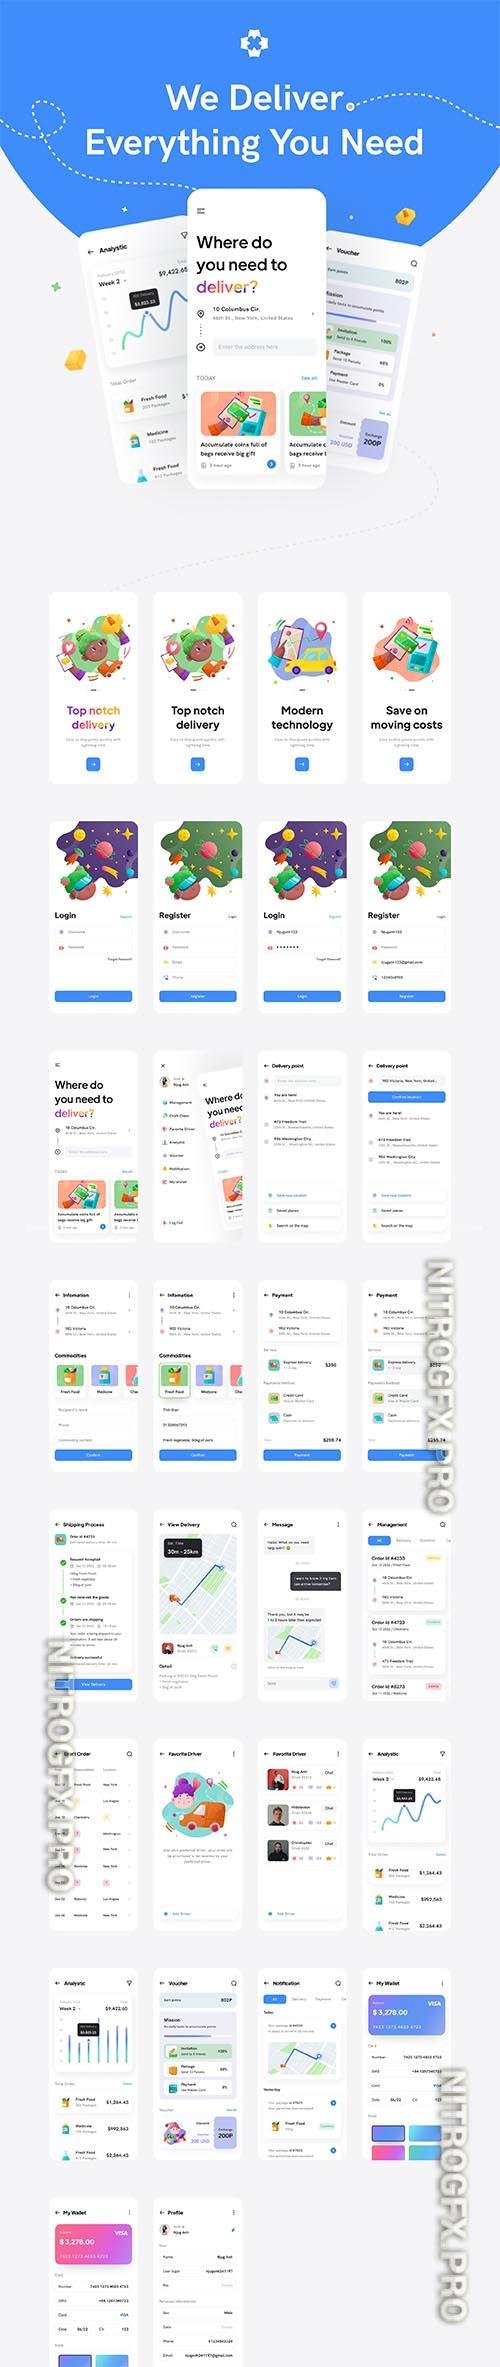 UI8 - Deliking - Delivery App : iOS Ui Kit